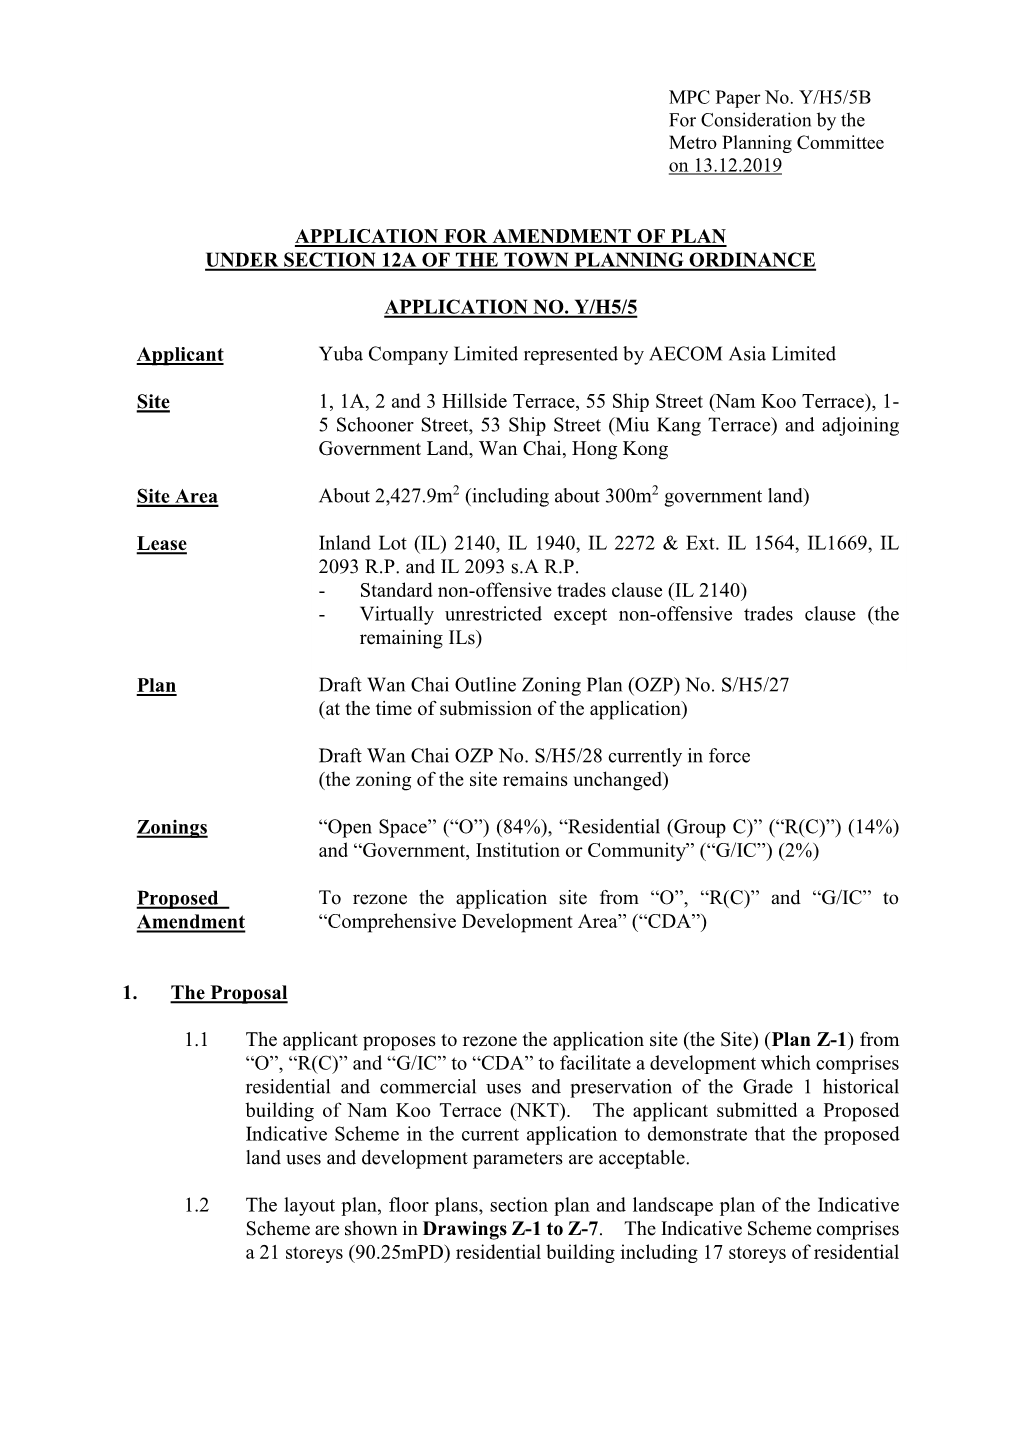 Application for Amendment of Plan Under Section 12A of the Town Planning Ordinance